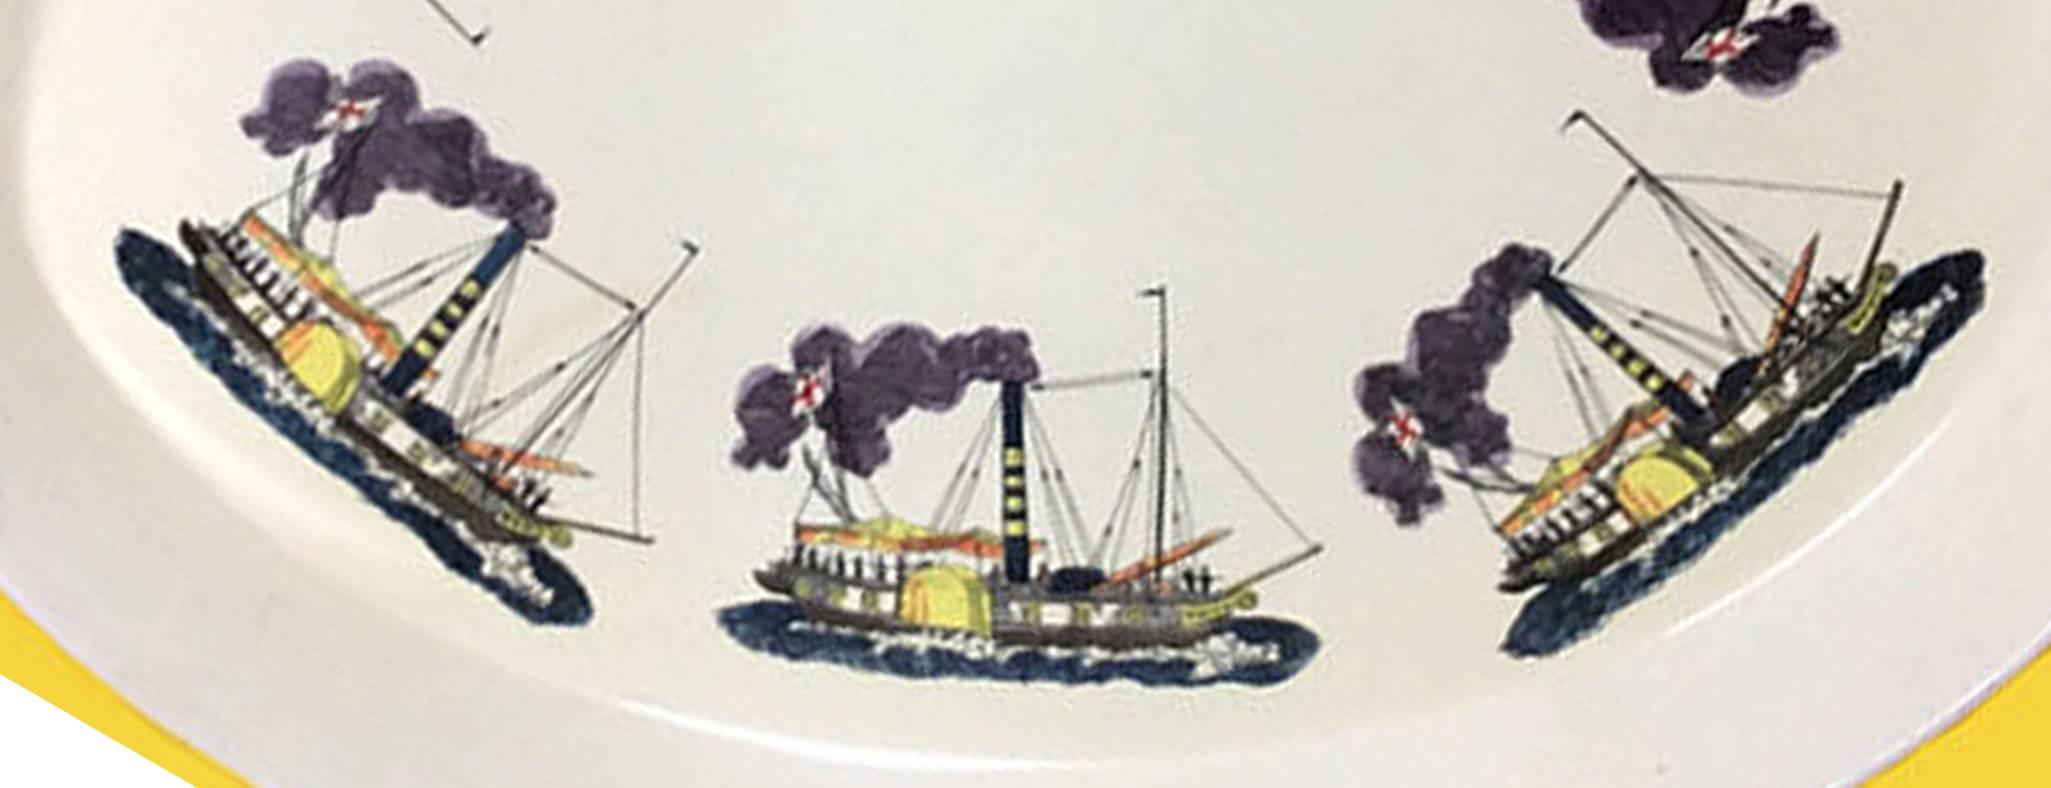 Piero Fornasetti metal steamboat tray, 
early 1950s.

An oval metal serving tray with high sides on a white ground with steamboats in the round. This is a rare Fornasetti subject.